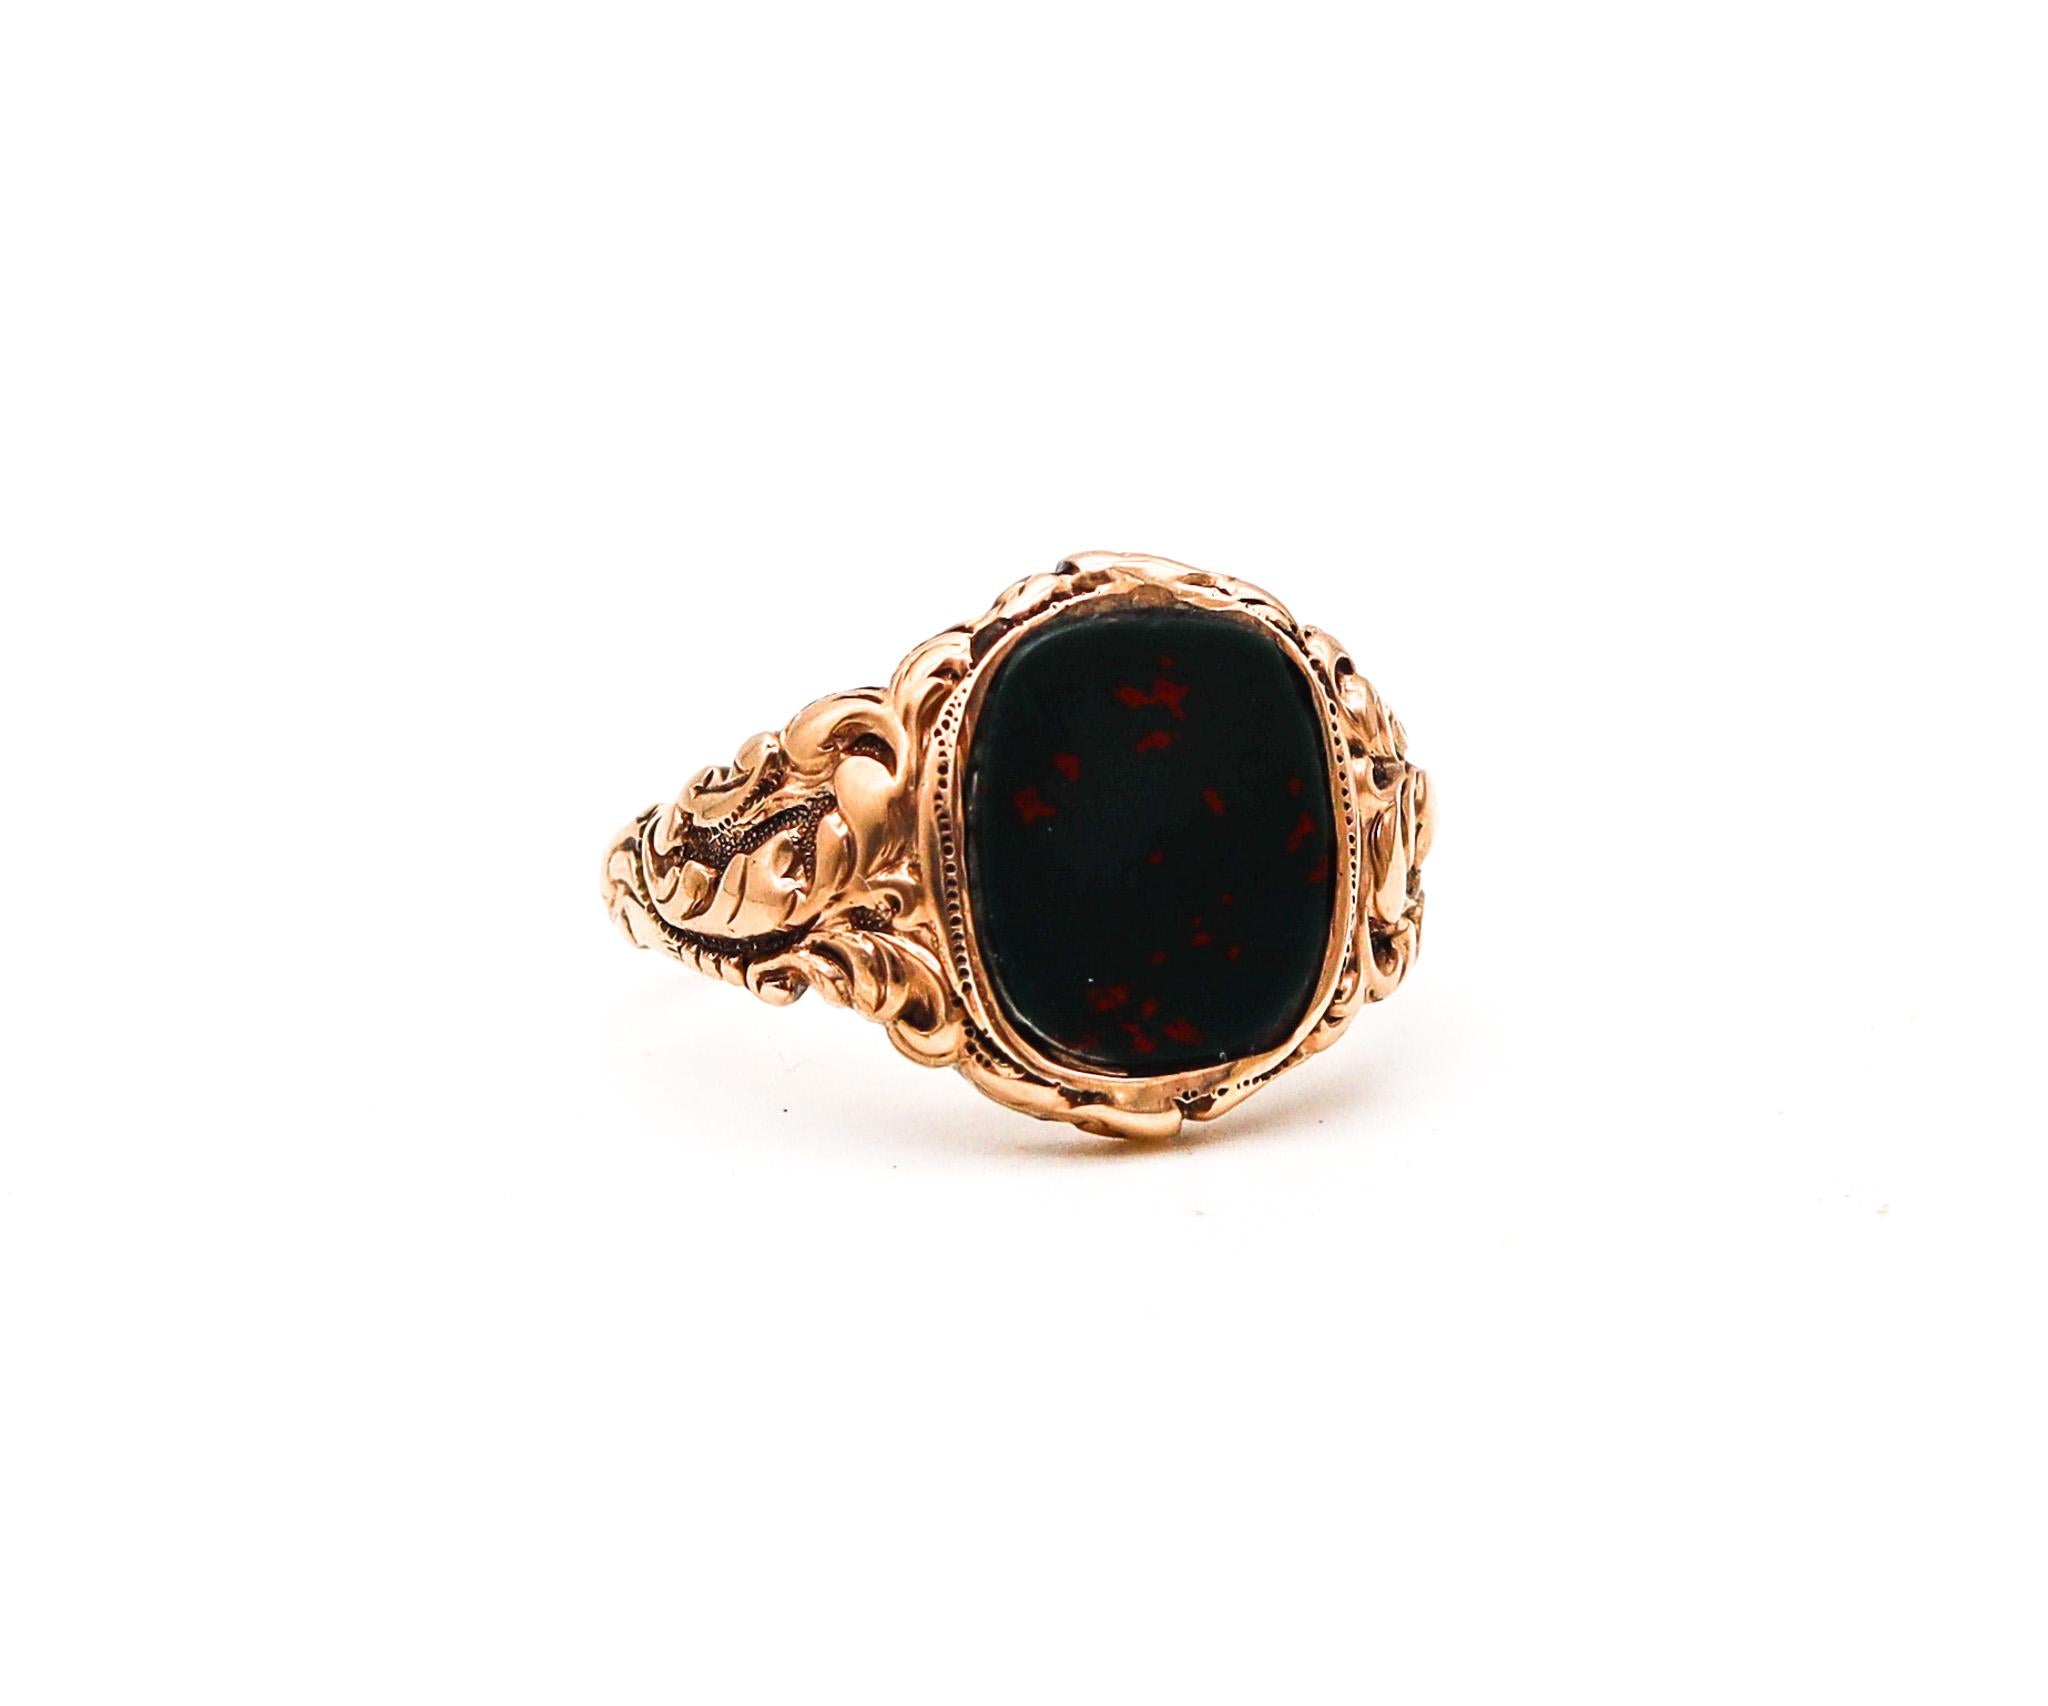 Art nouveau ring with bloodstone. designed by Allsopp-Steller.

A highly decorated ring, created in America during the art nouveau period, back in the 1900. This beautiful ring has been crafted in New Jersey by the jewelry company of Allsopp-Steller